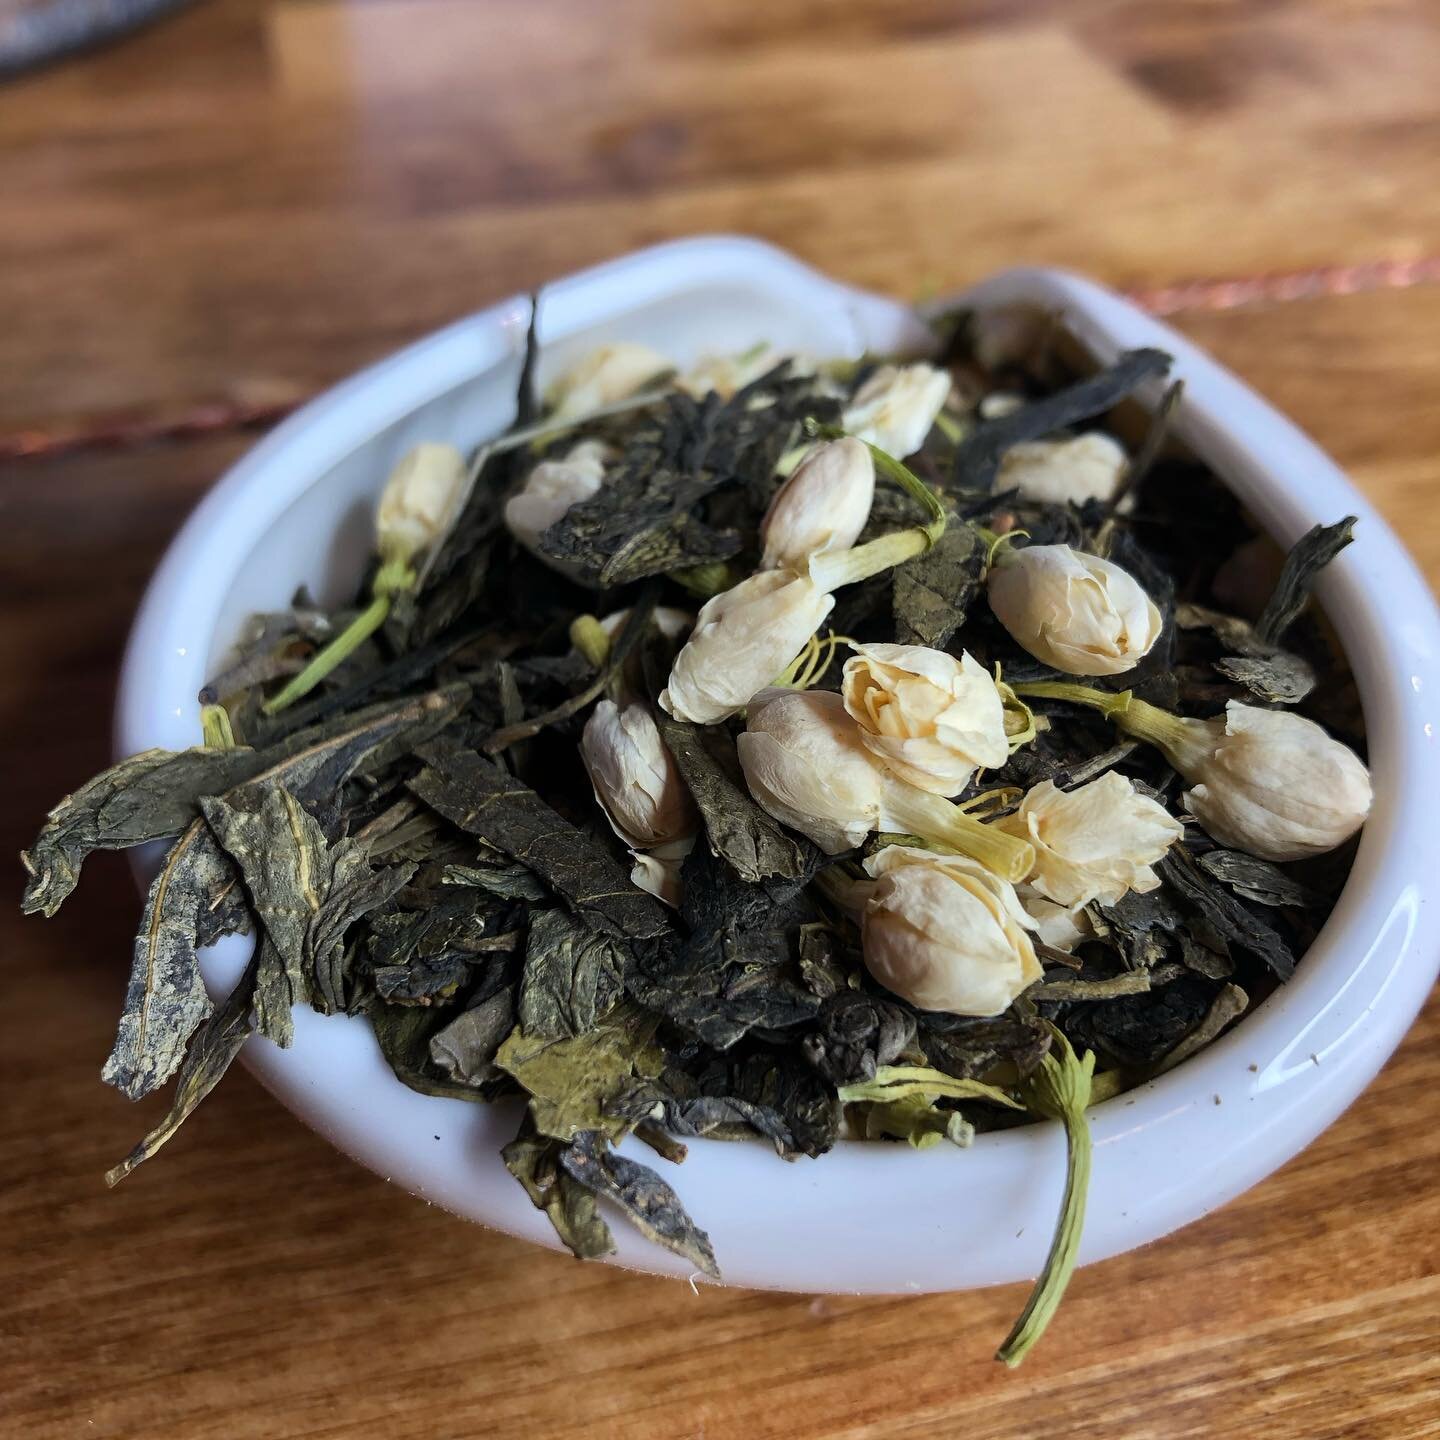 Long Jing &ldquo;Dragonwell&rdquo; Green Tea with Jasmine Flowers. Find it at @manifesto_coffee and the teahouse.